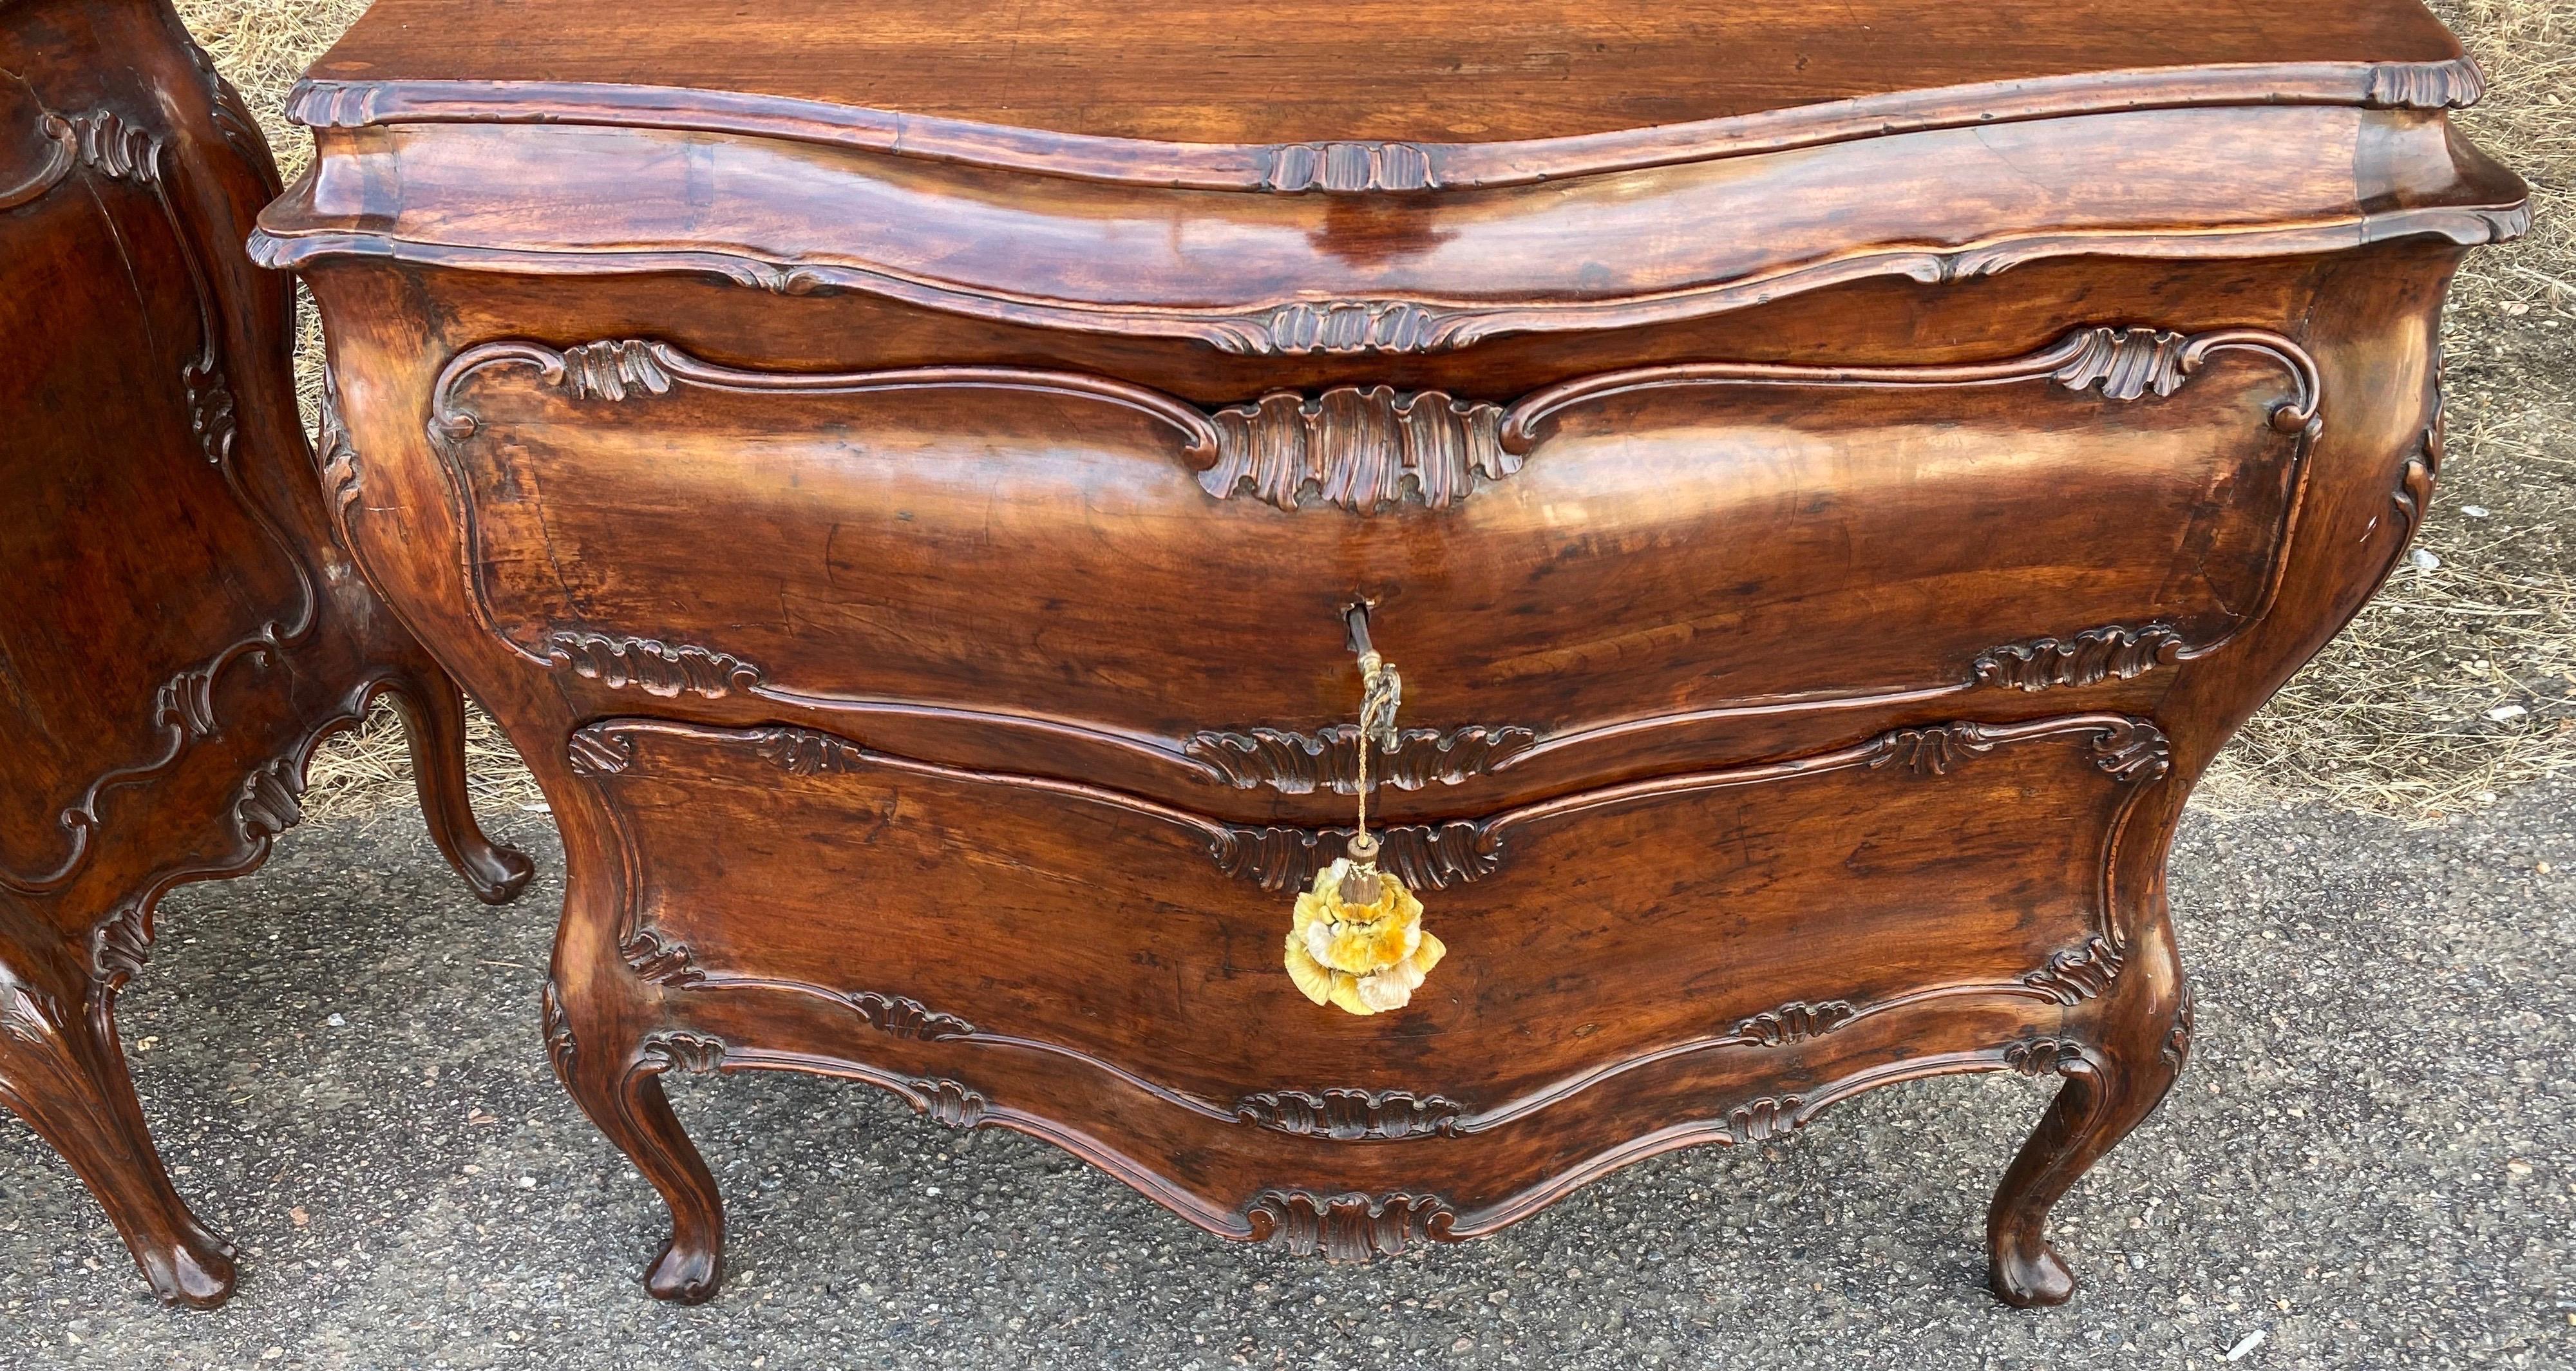 Fine Pair of 18th Century Venetian Rococo Bombe Bedside Chests of Drawers For Sale 2